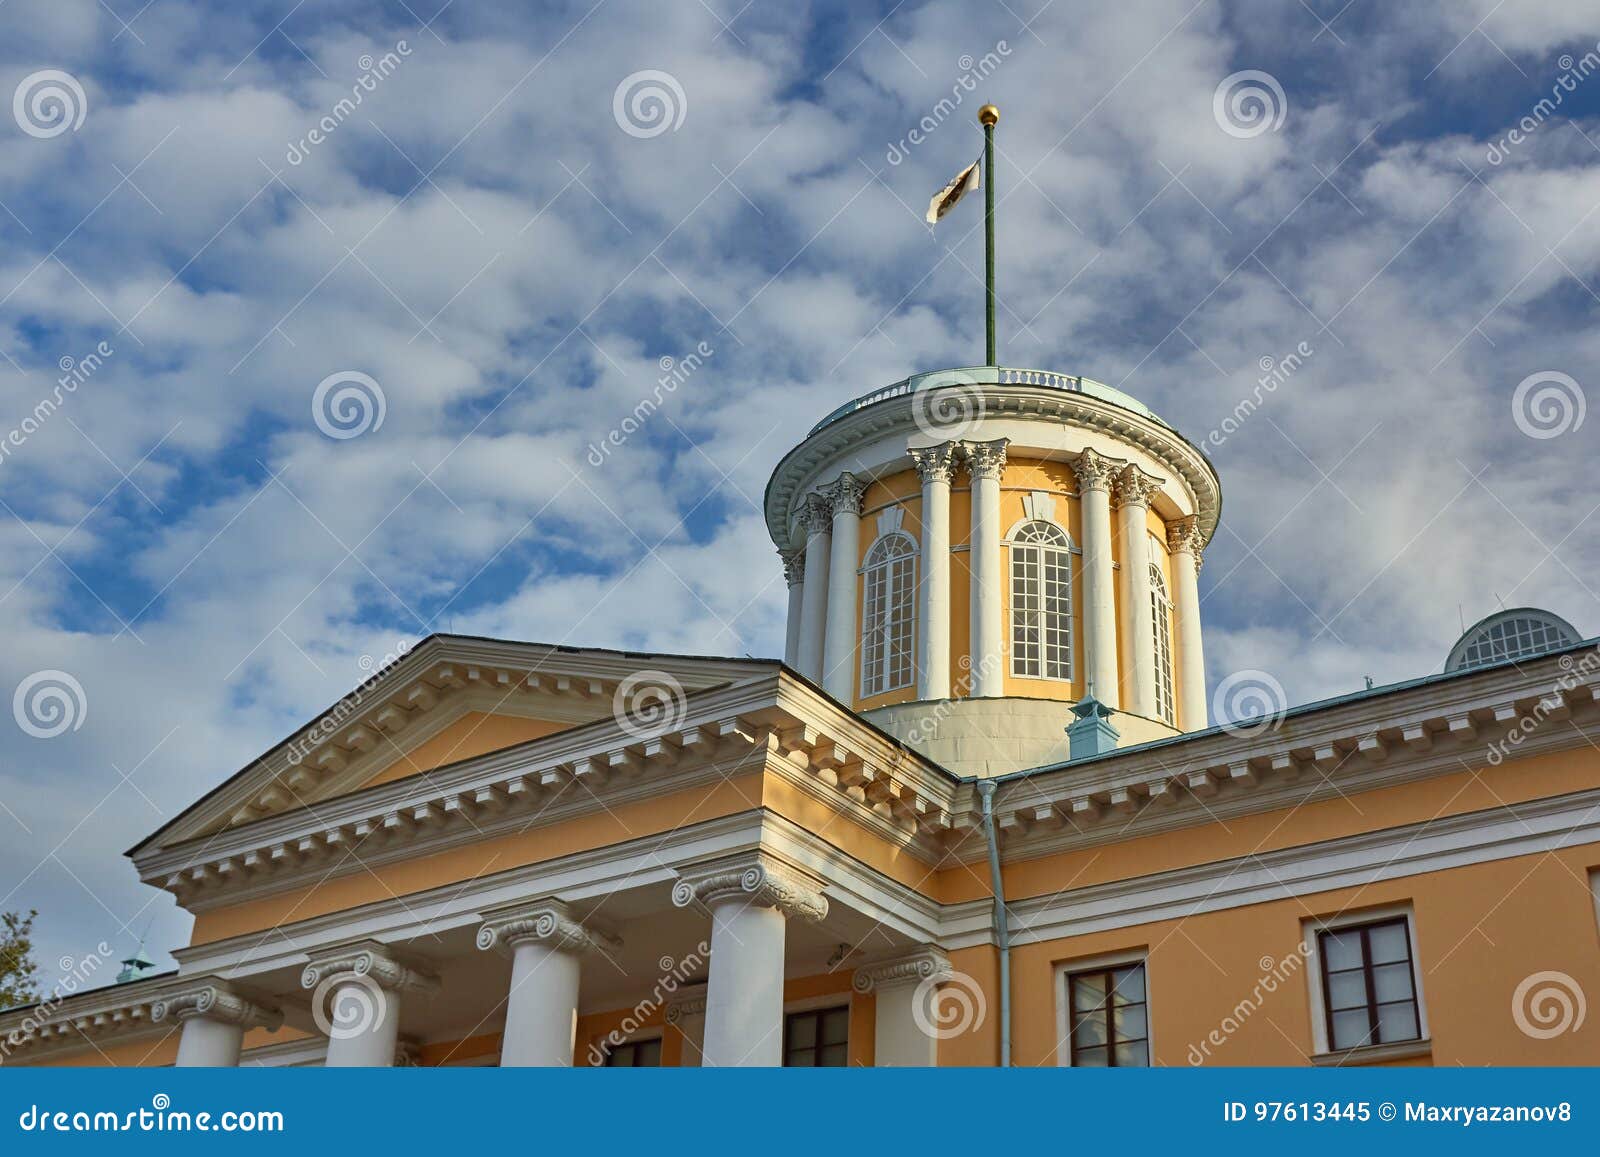 Arkhangelskoye Estate, Russia Stock Image - Image of place ...